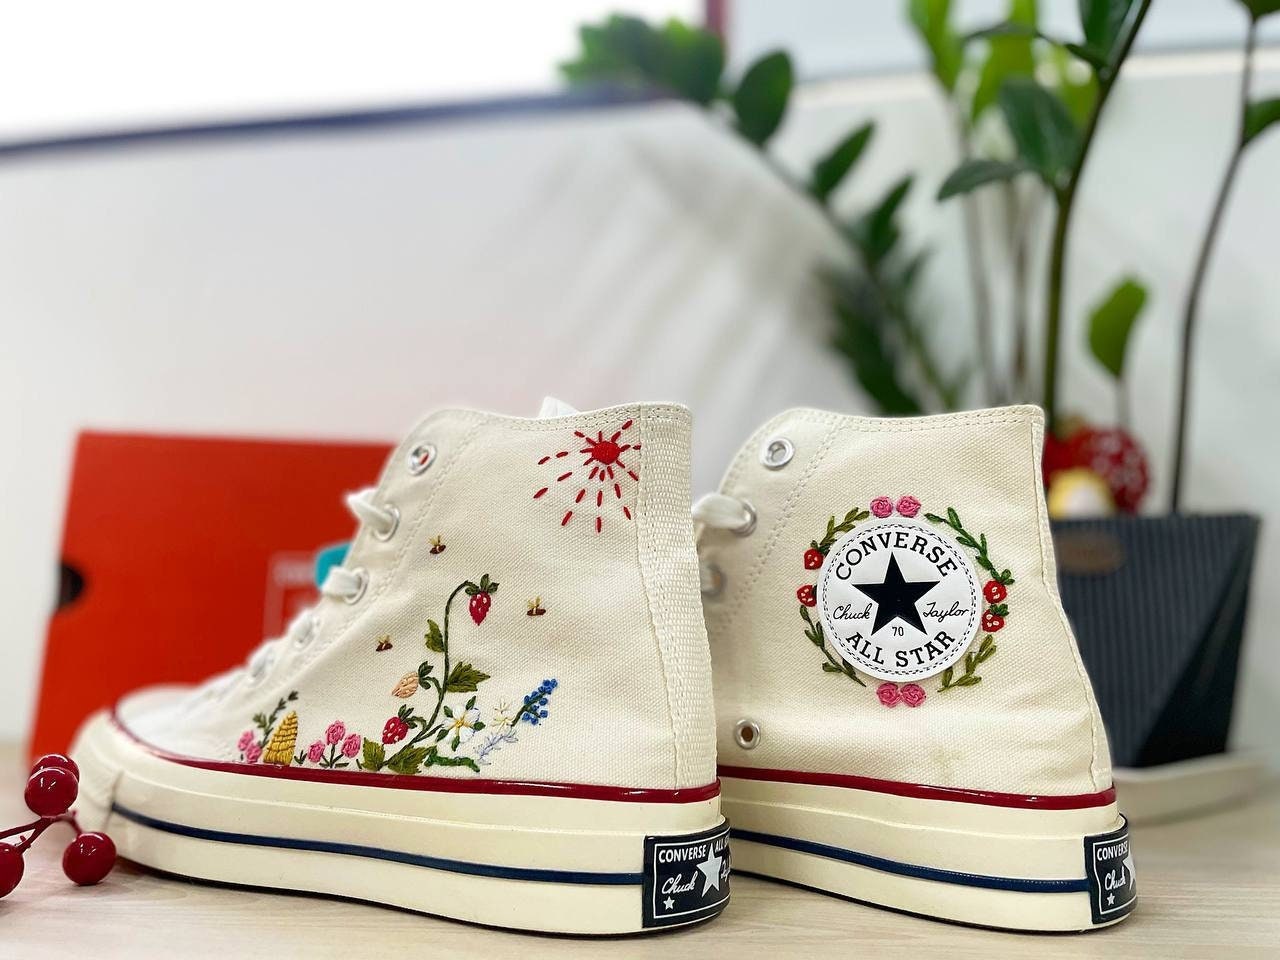 Ambientalista Novelista pierna Strawberry and Bees Embroidery Converse Hand Embroidery - Etsy